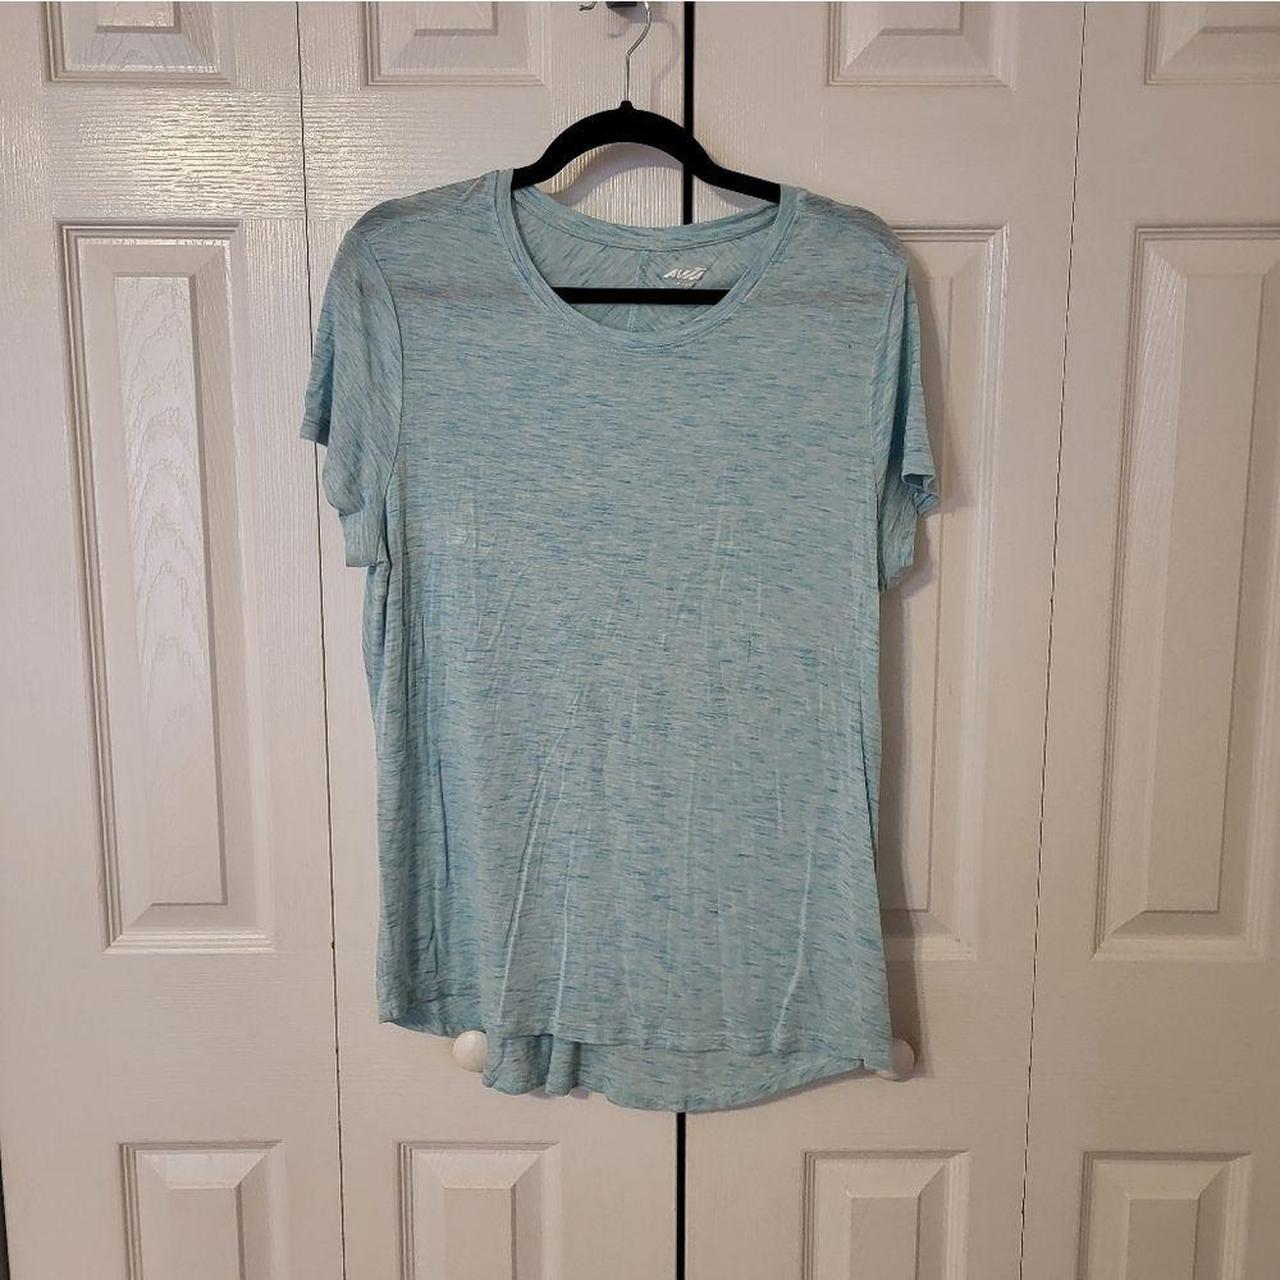 Gently Used Women's Xersion Activewear Shirt, Short Sleeves